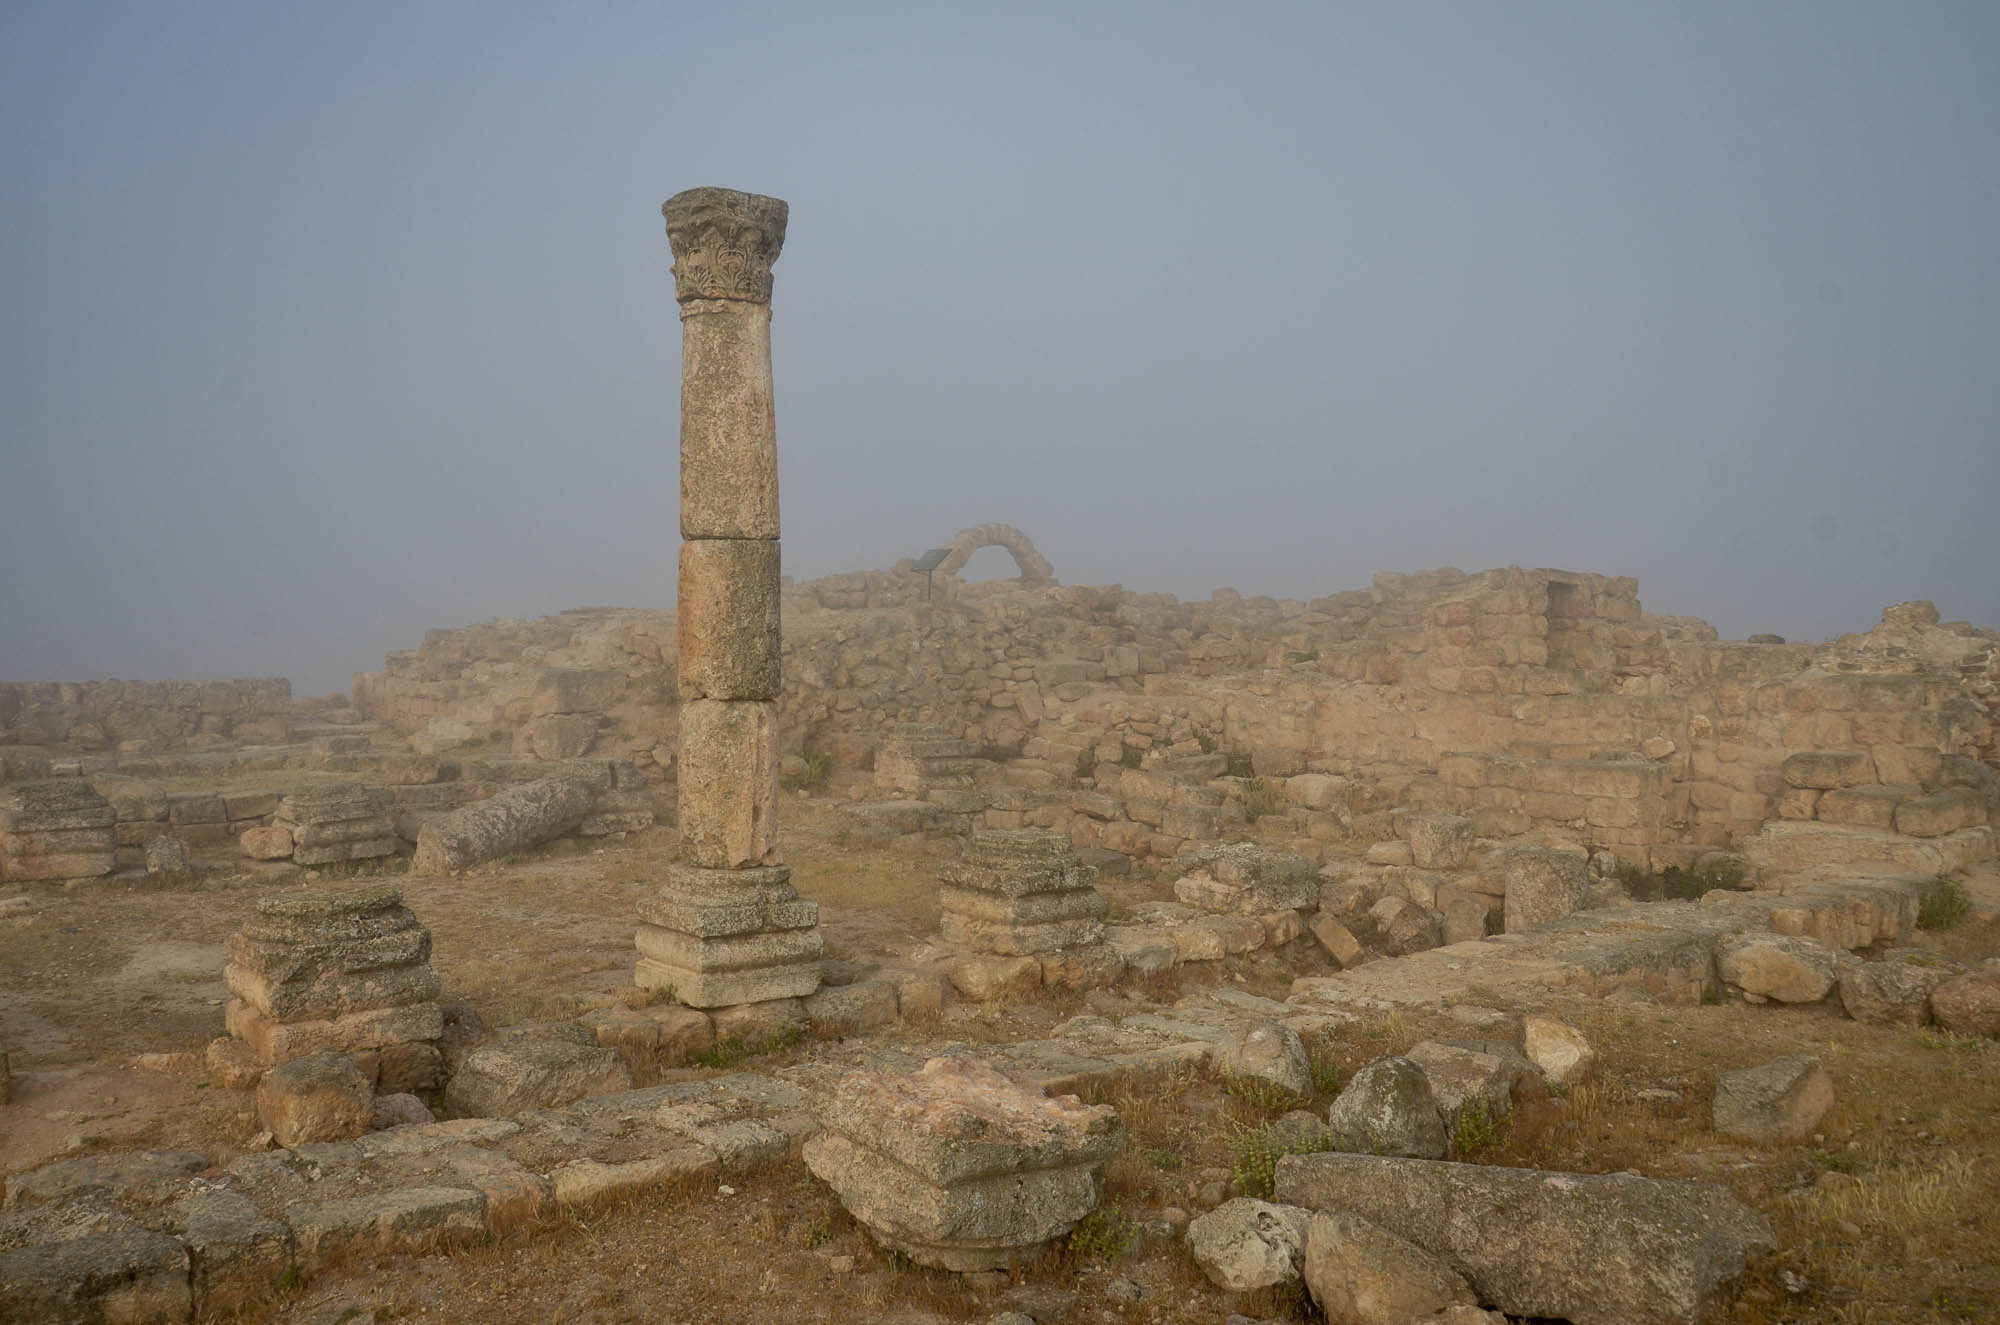 Remains of a Byzantine church, and in the far background, an arch from the Mamluk Dynasty shrouded in haze at Tall Hisban. (Courtesy: Doug Clark)